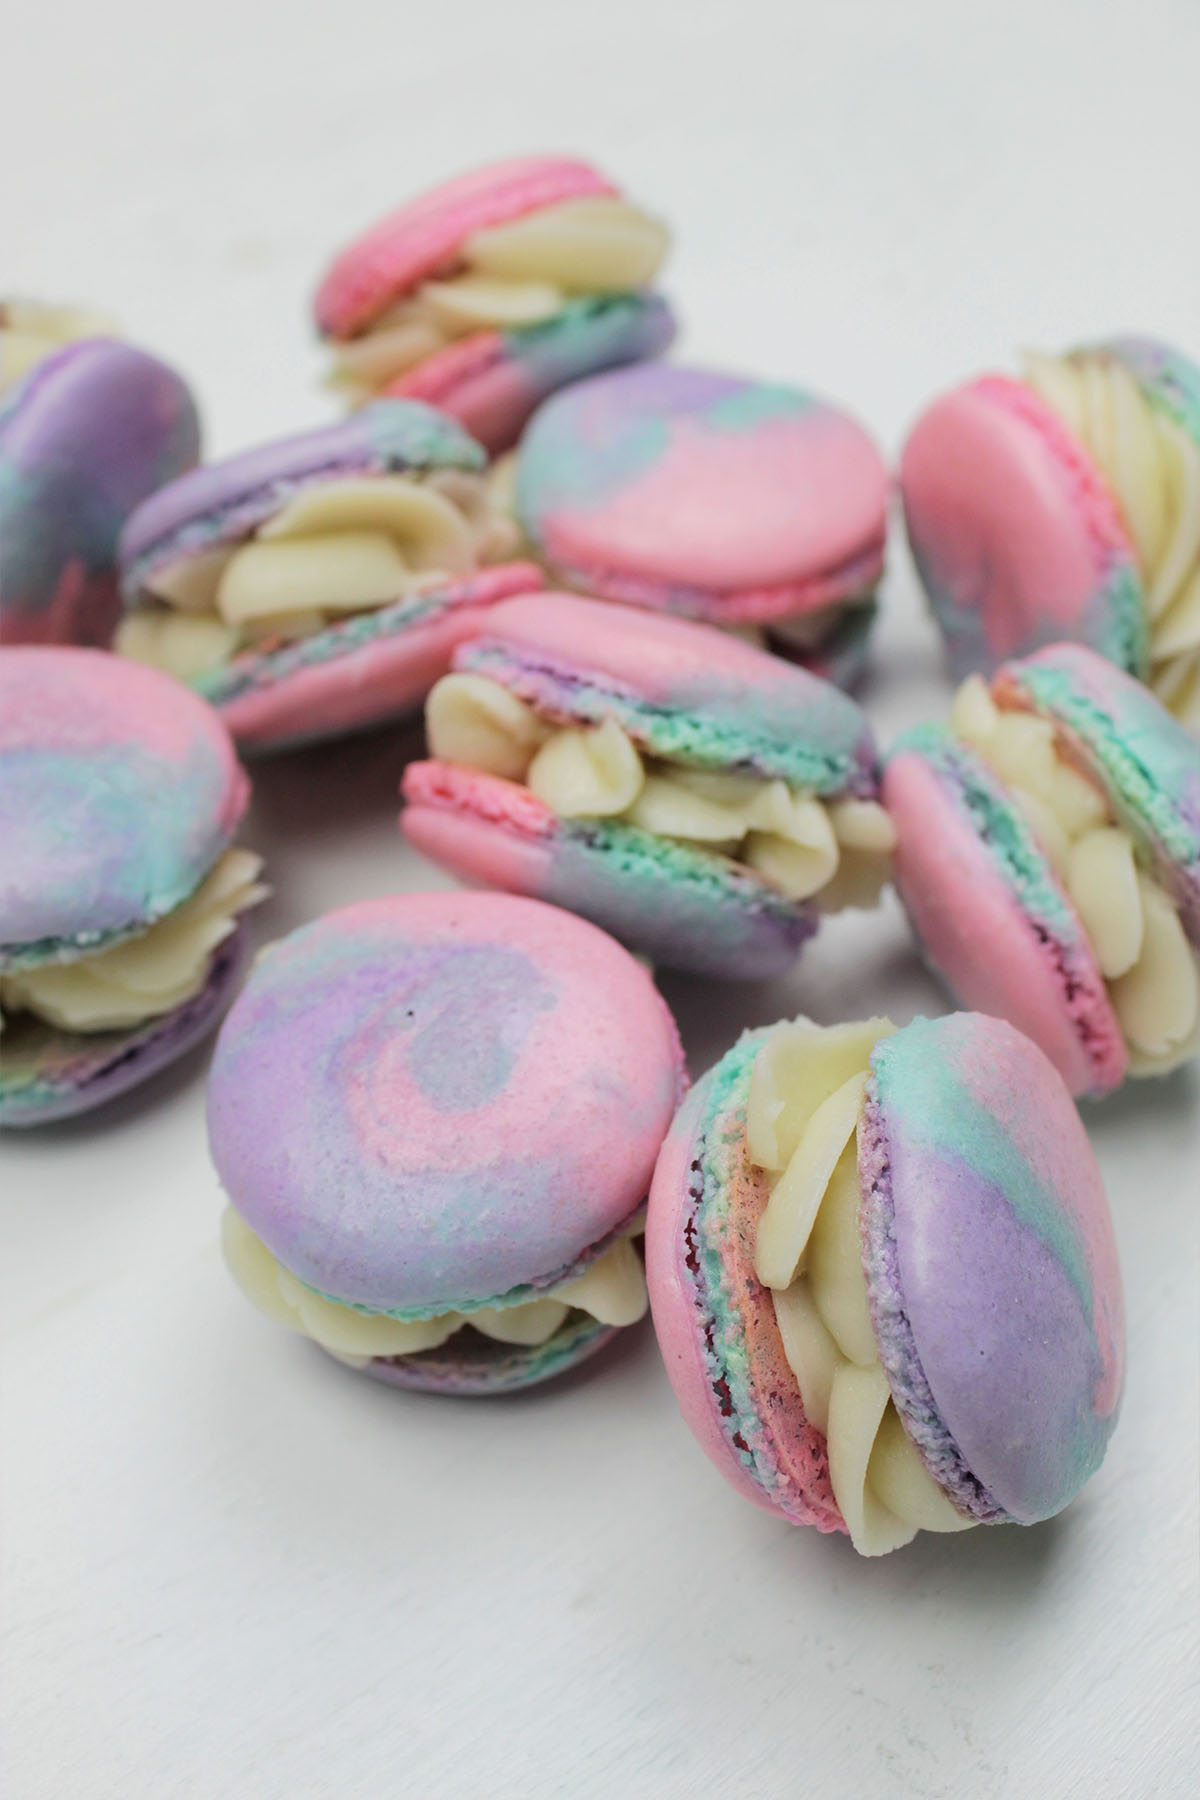 tie dye macaron shells filled with buttercream.